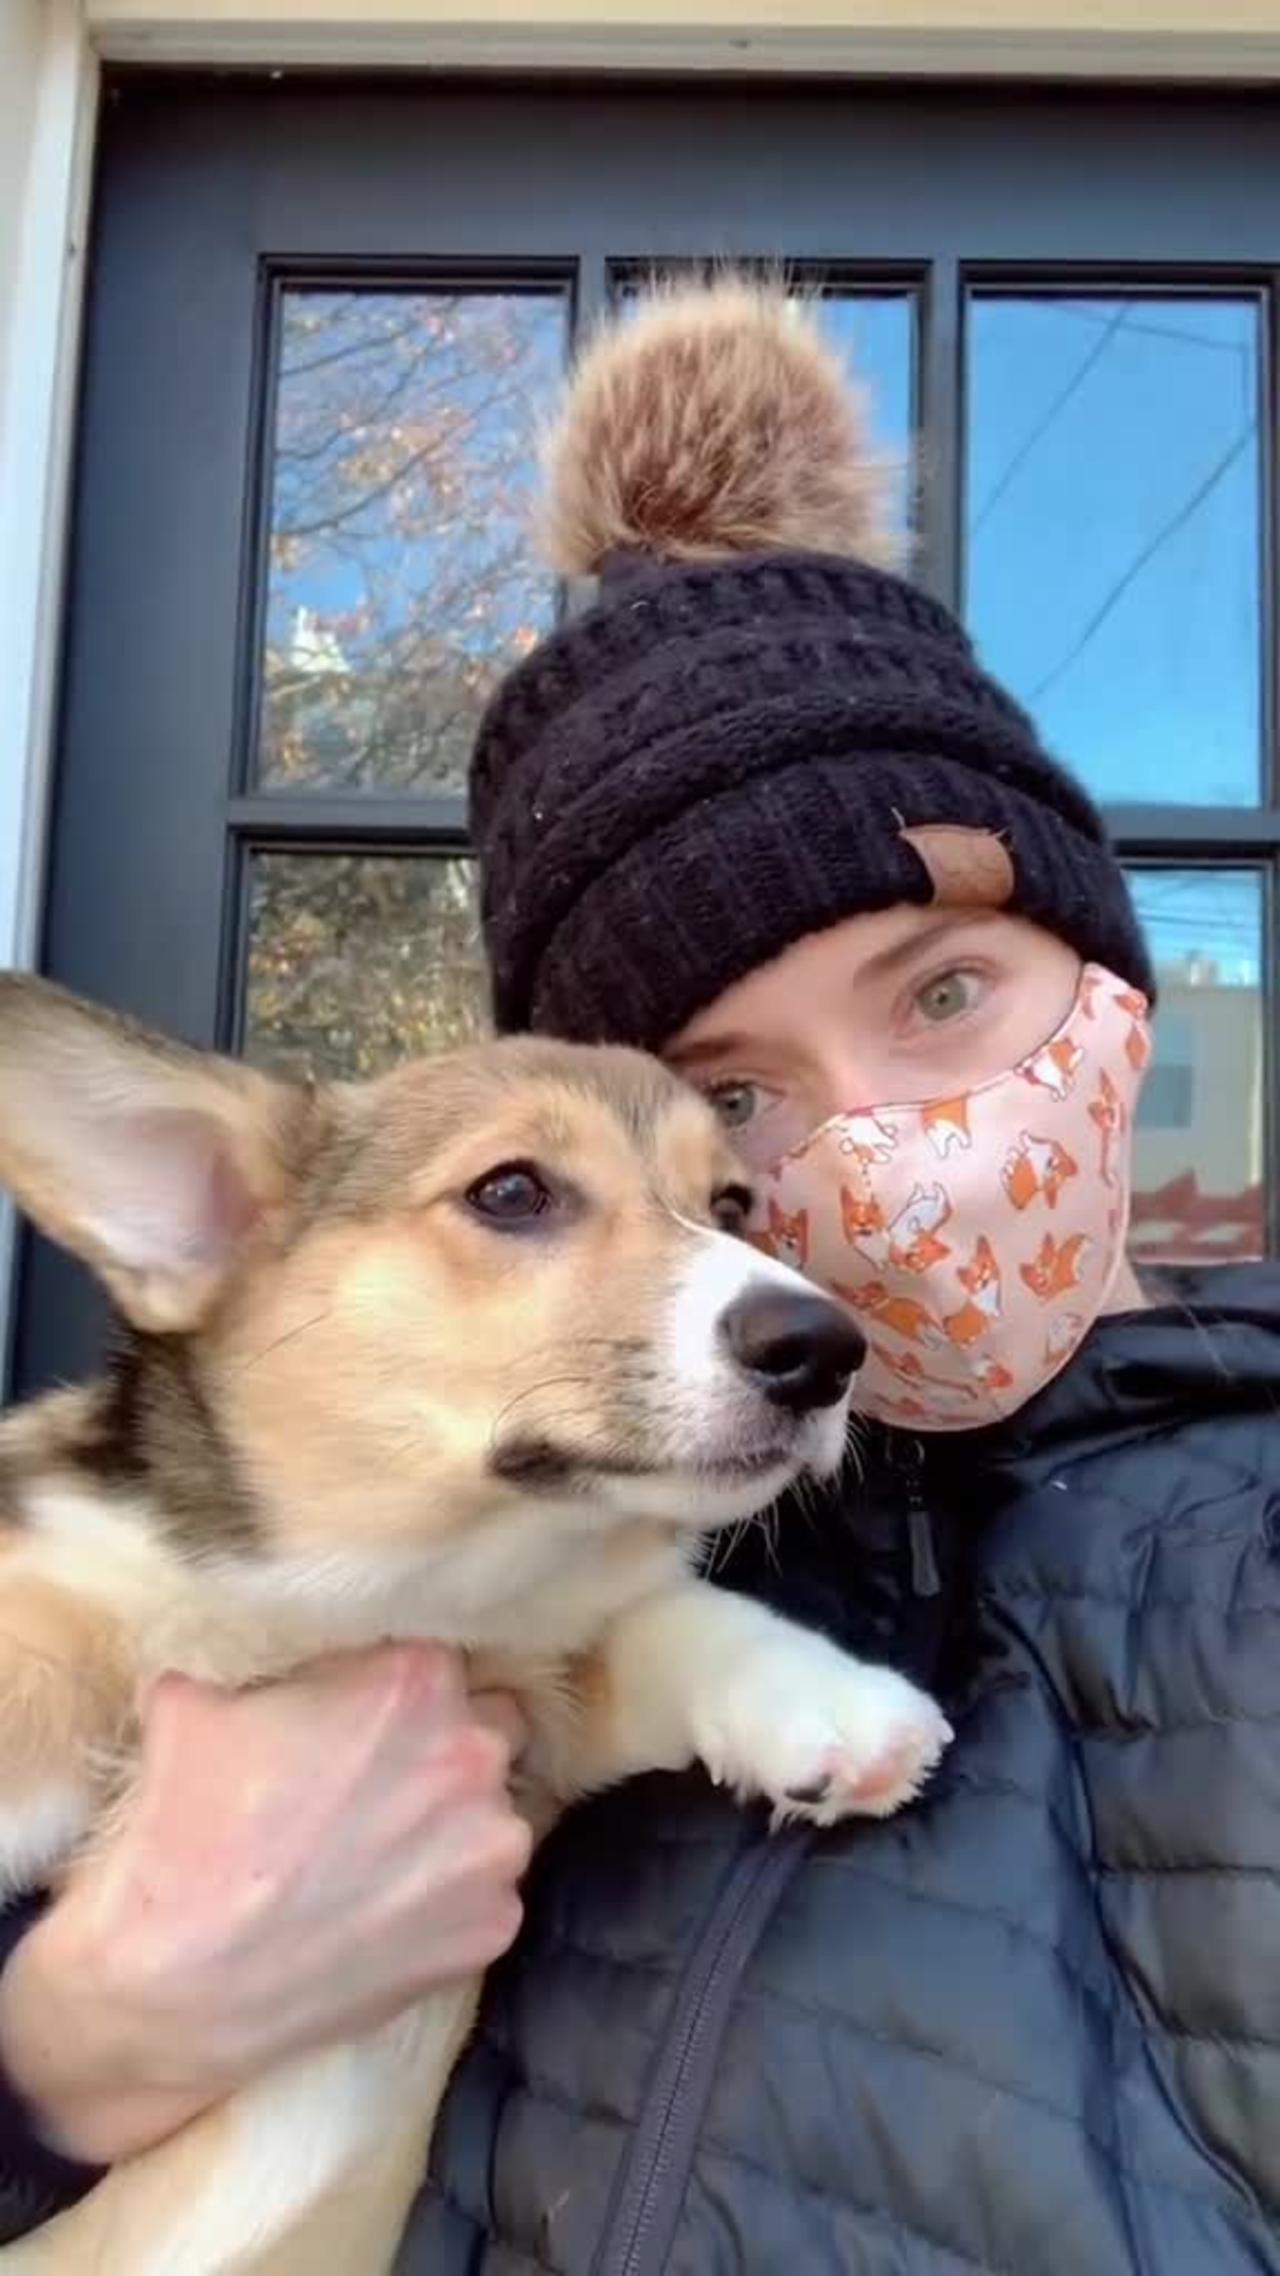 Wear a mask, but make it match your dog